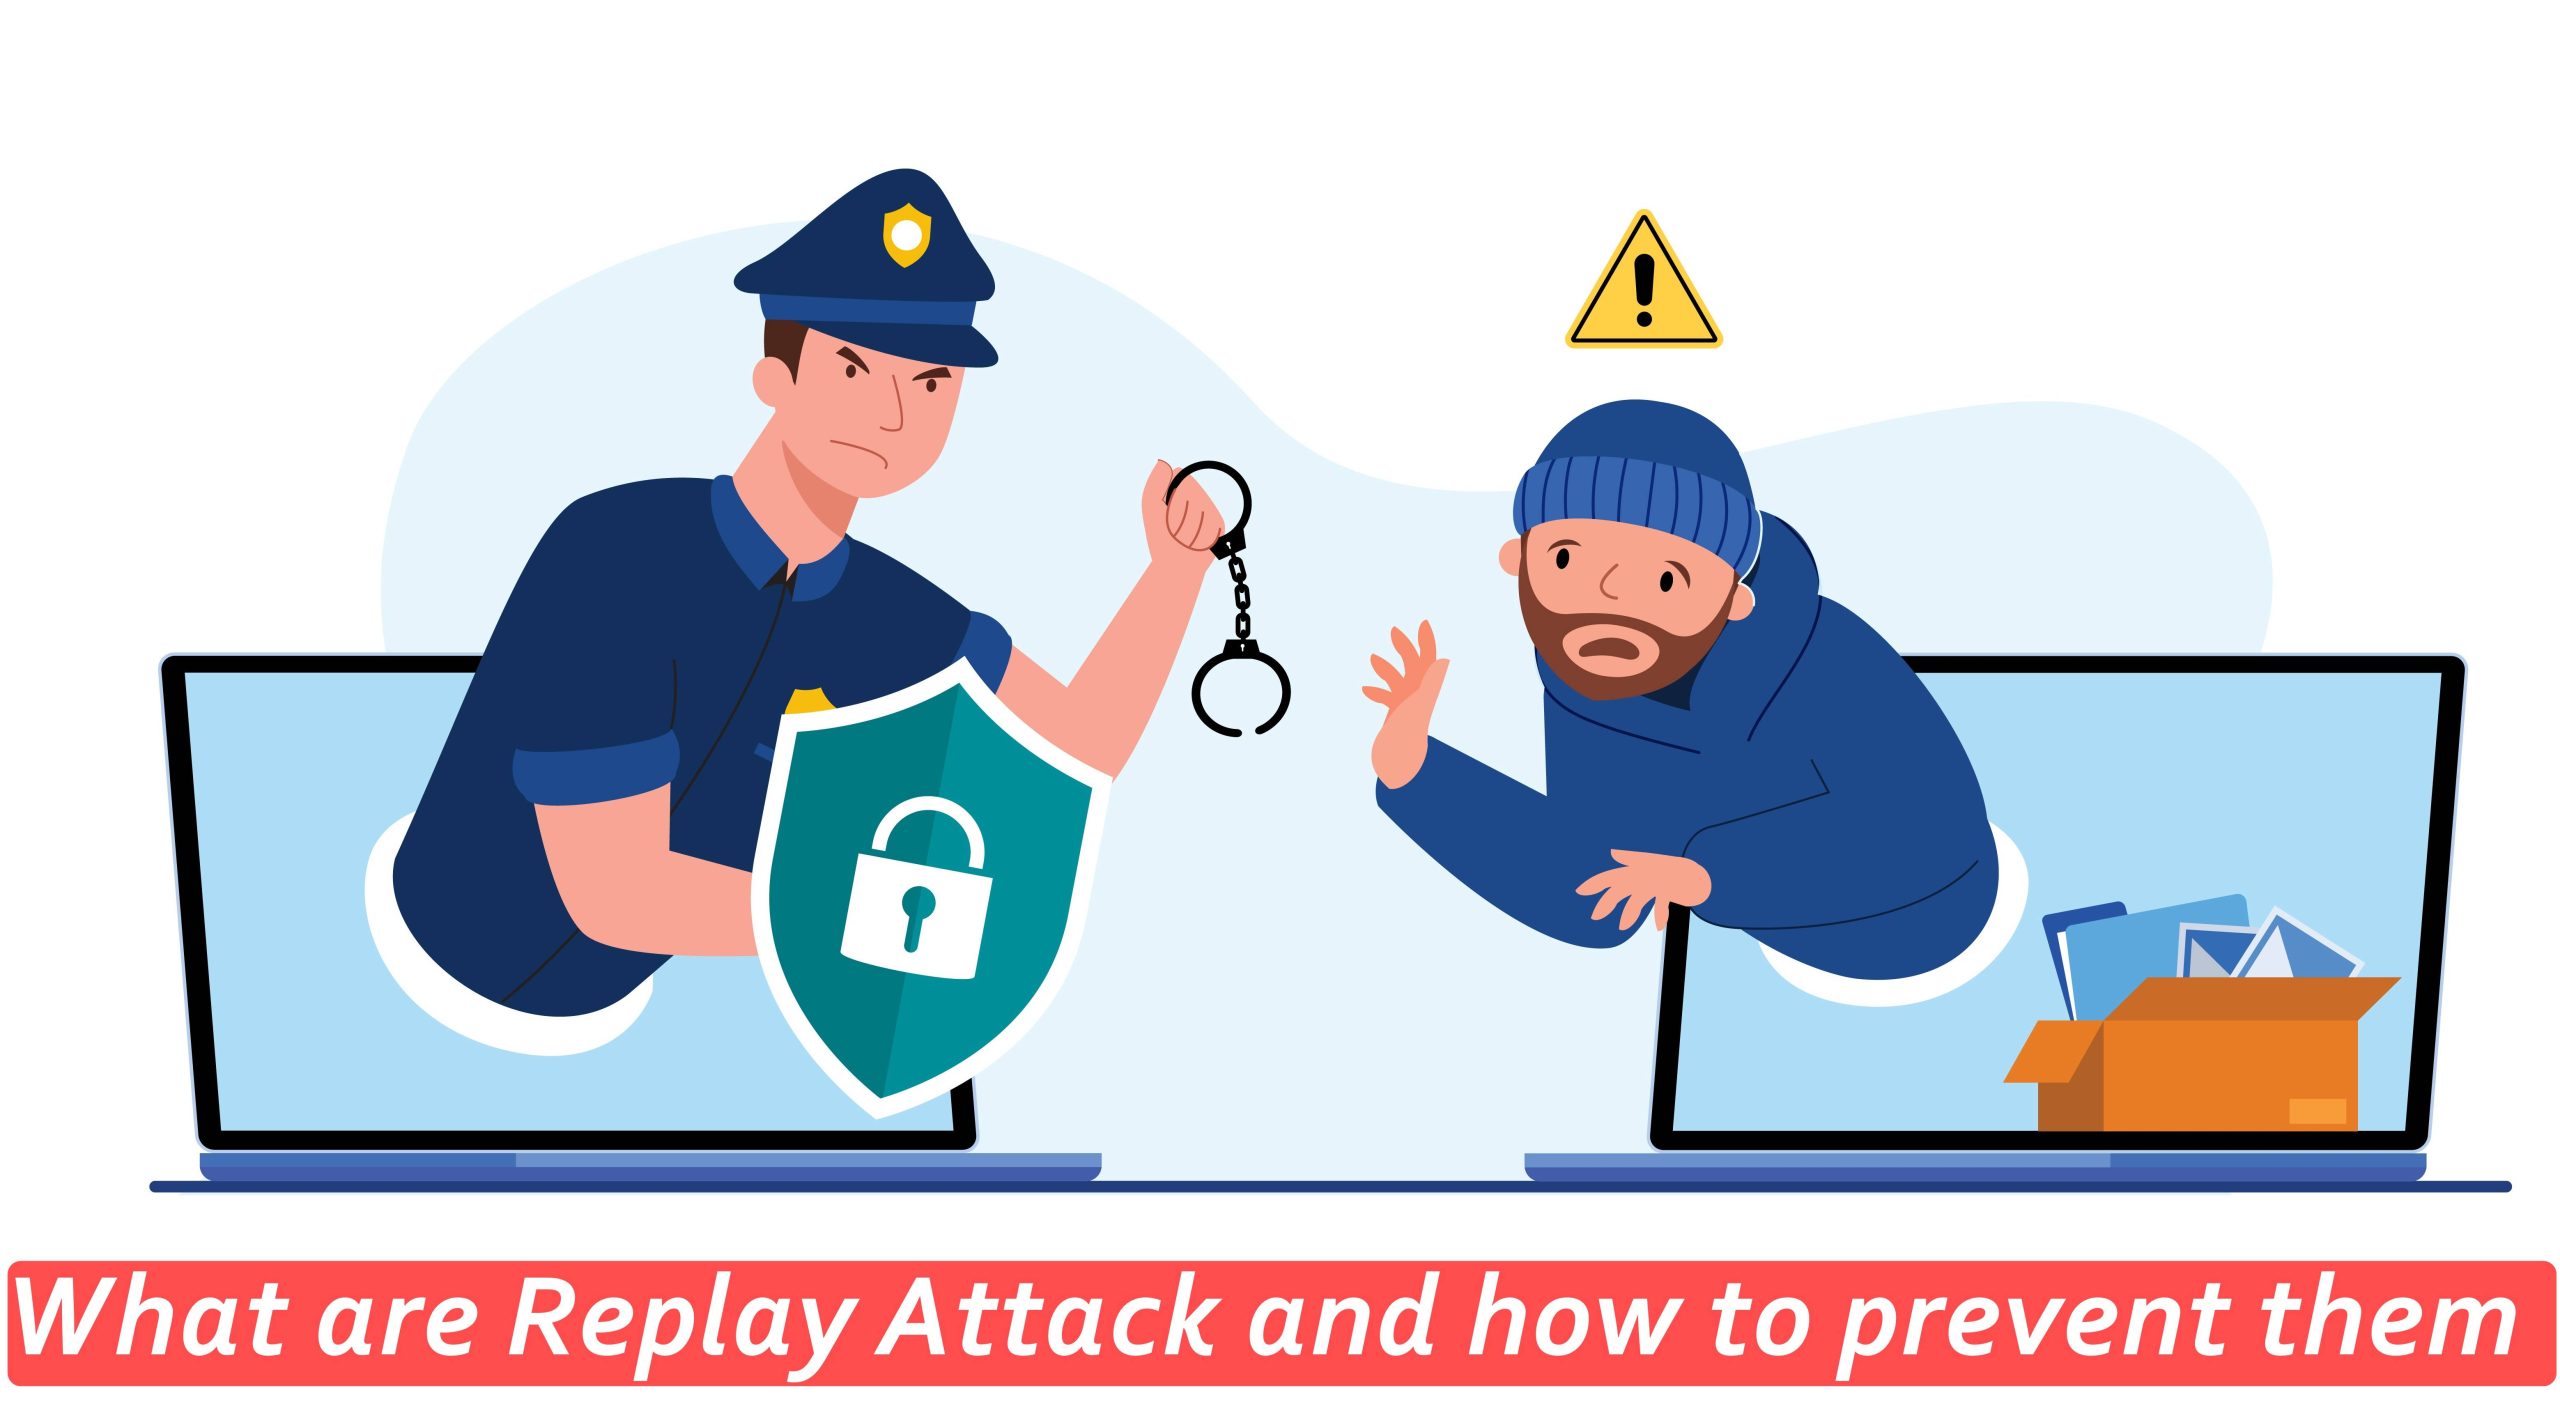 What are Replay Attack and how to prevent them